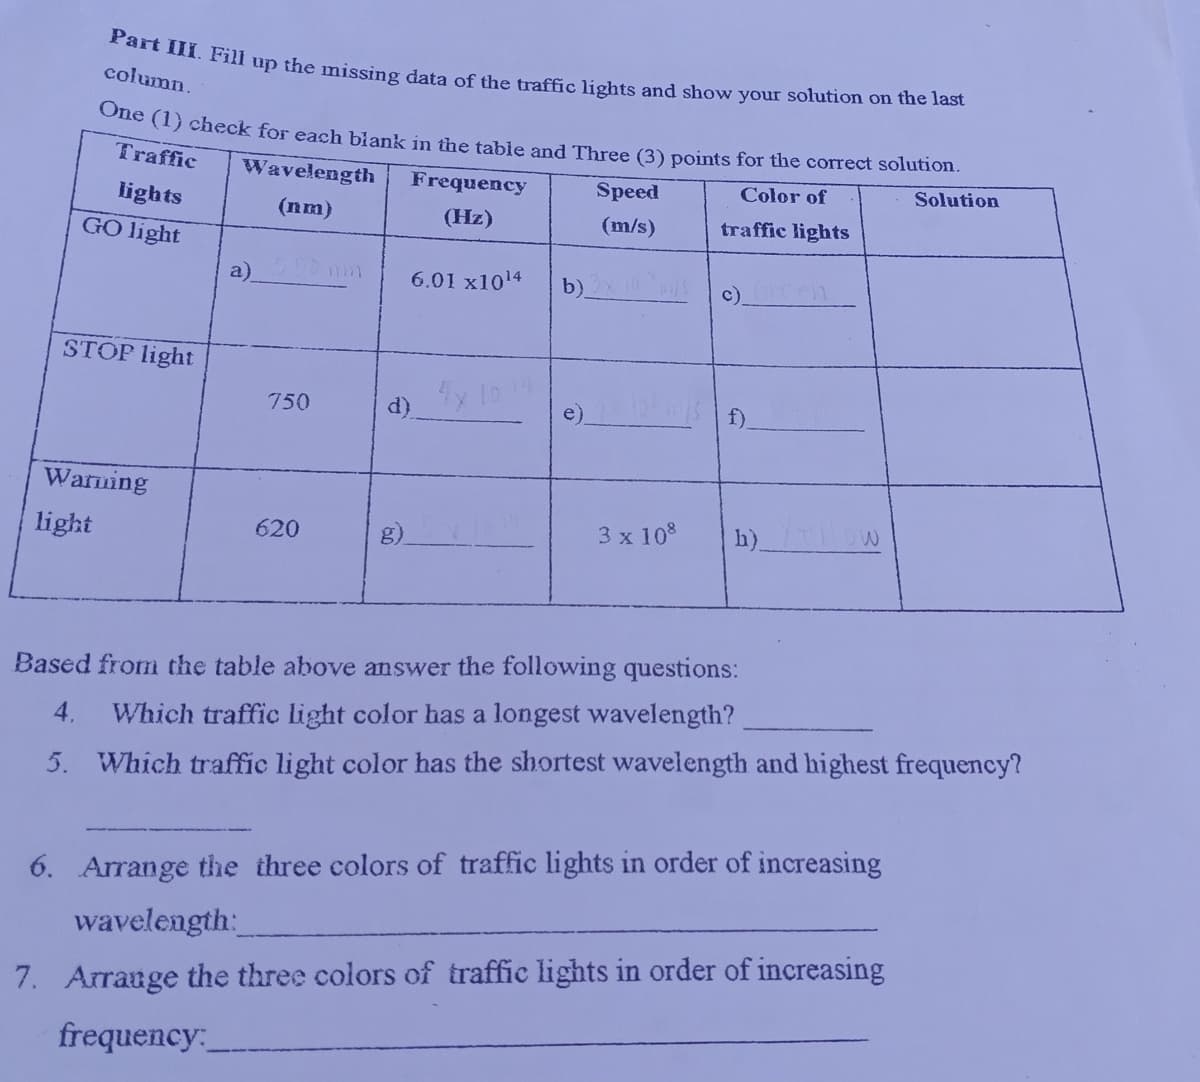 Part III. Fill up the missing data of the traffic lights and show your solution on the last
column.
One (1) check for each biank in the table and Three (3) points for the correct solution.
Traffic
Wavelength
Frequency
Speed
Color of
Solution
lights
(nm)
(Hz)
(m/s)
traffic lights
GO light
a)
6.01 x1014
b)
c).
STOP light
750
d)
e)
f).
Warning
light
620
g)
3 x 10%
h)
Based from the table above answer the following questions:
4.
Which traffic light color has a longest wavelength?
5. Which traffic light color has the shortest wavelength and highest frequency?
6. Arrange tihe three colors of traffic lights in order of increasing
wavelength:
7. Arrauge the three colors of traffic lights in order of increasing
frequency:
